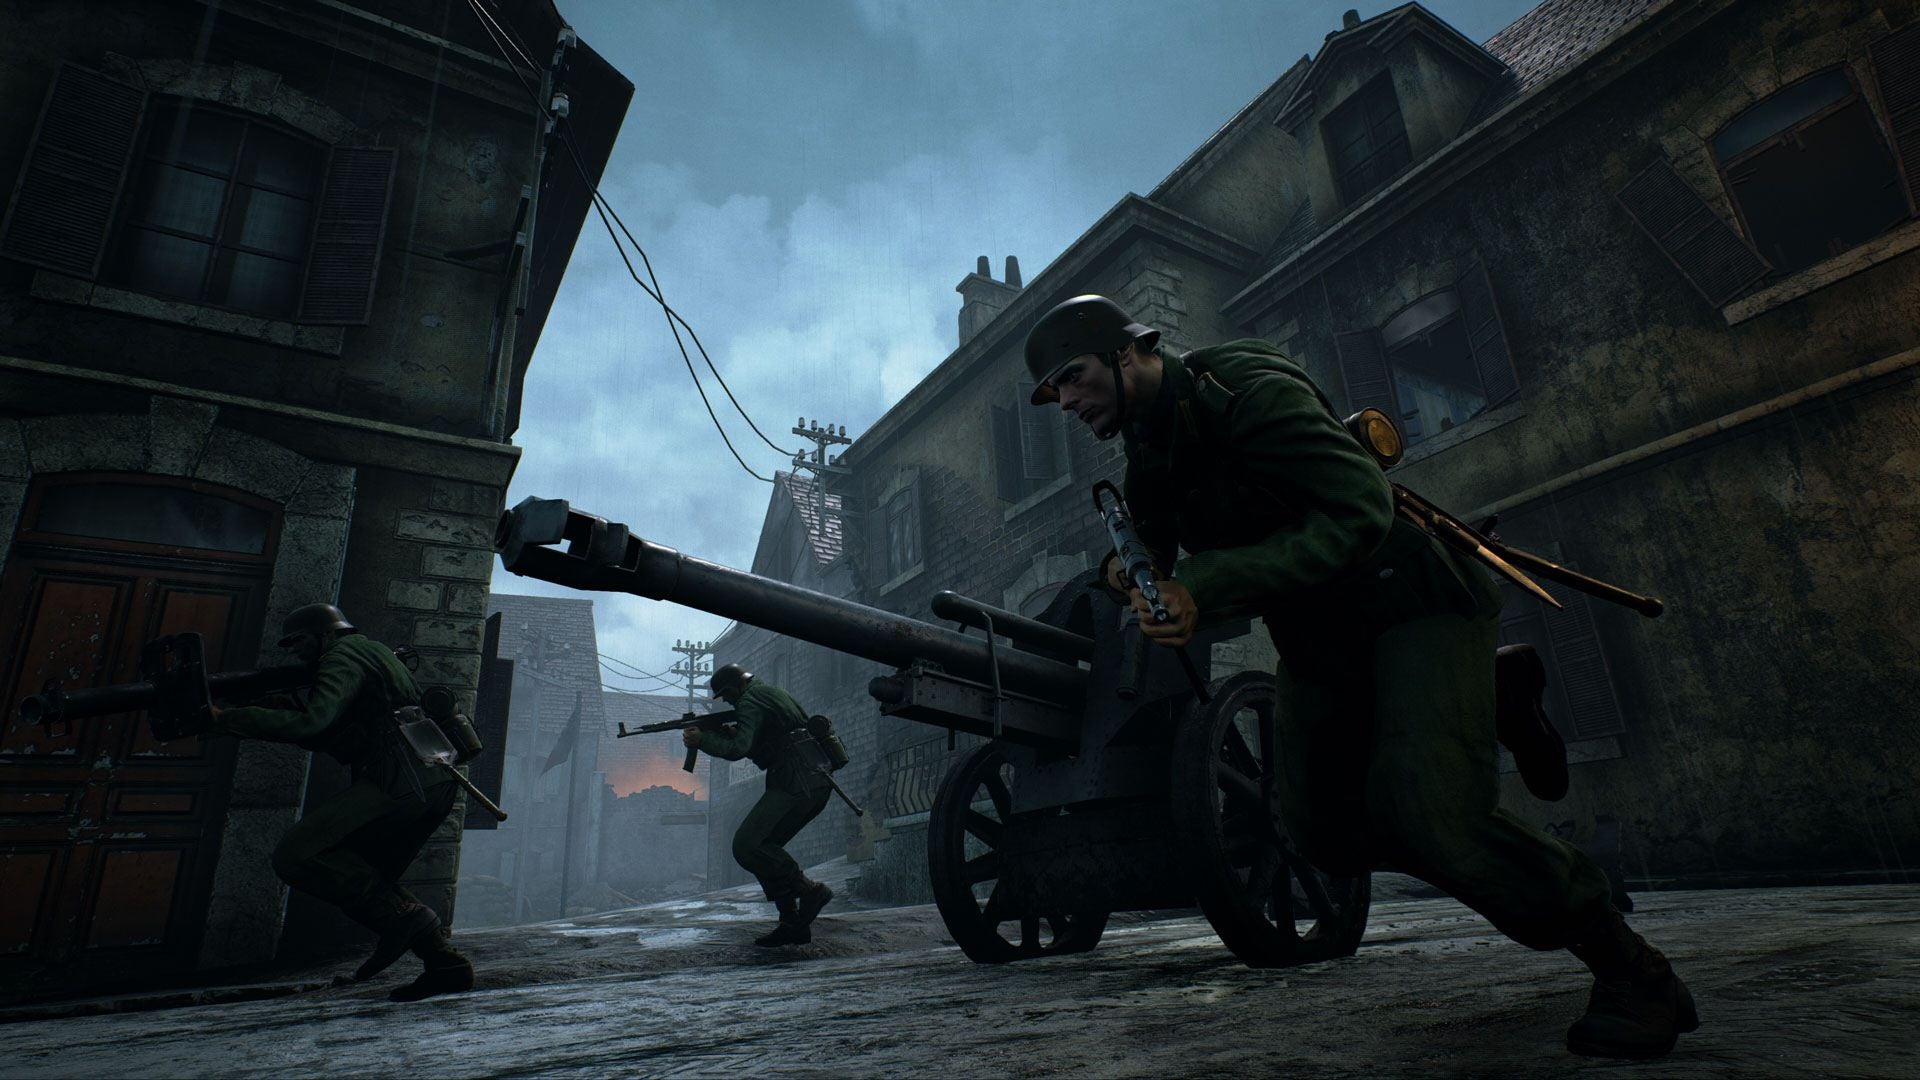 Image for You'll be able to get your hands on WW2 shooter Days of War in two weeks